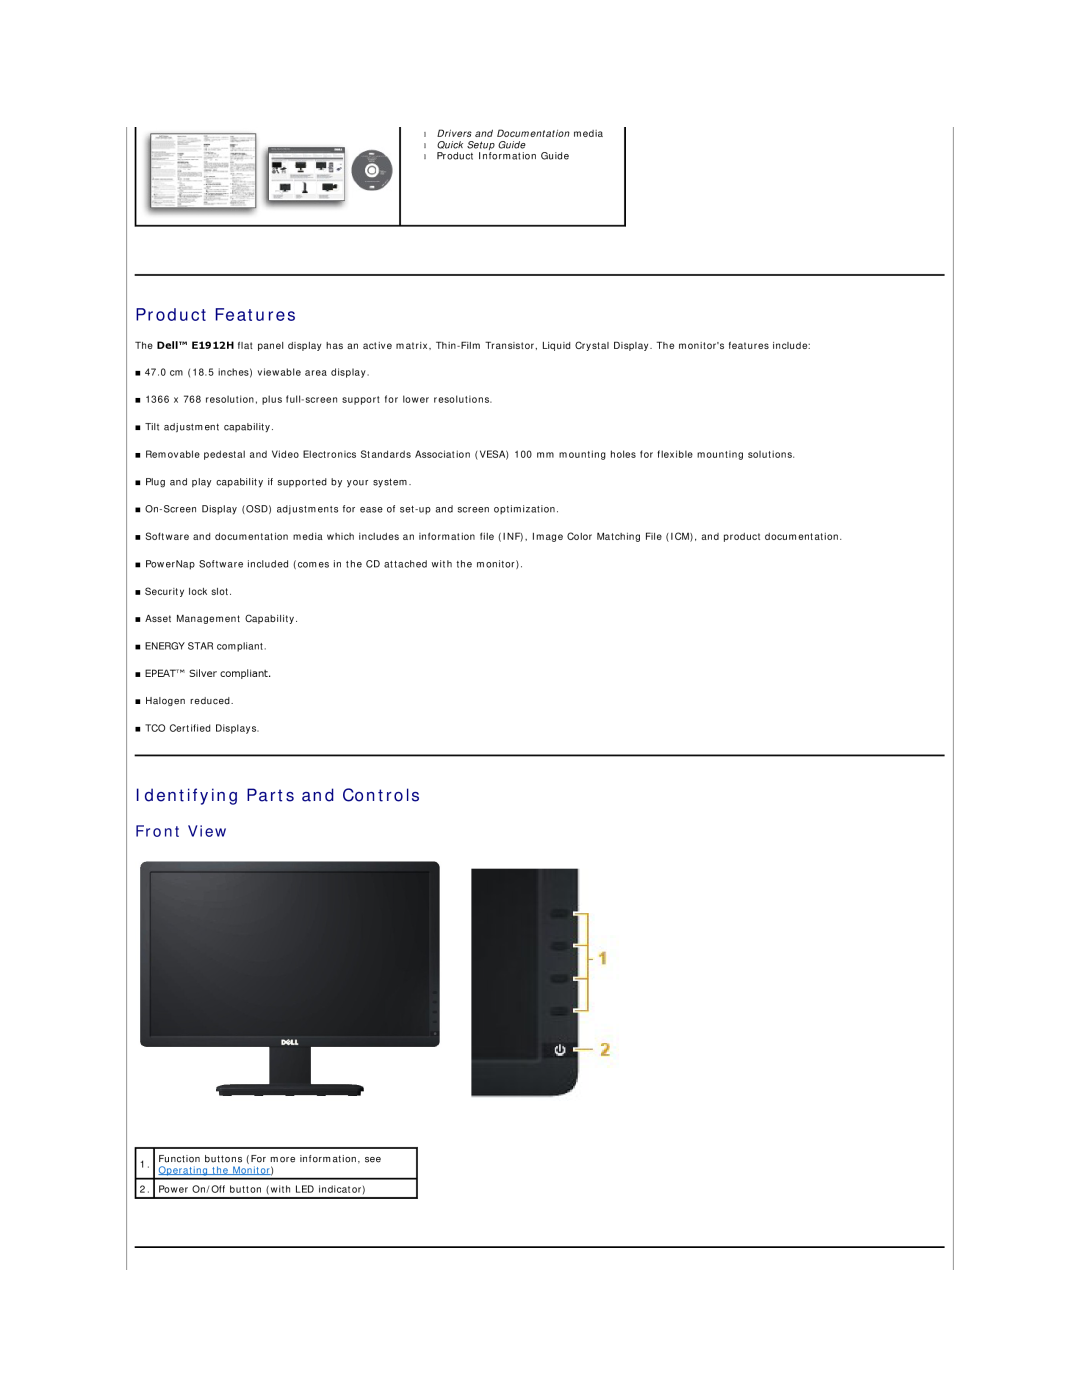 Dell E1912HC appendix Product Features, Identifying Parts and Controls, Front View 